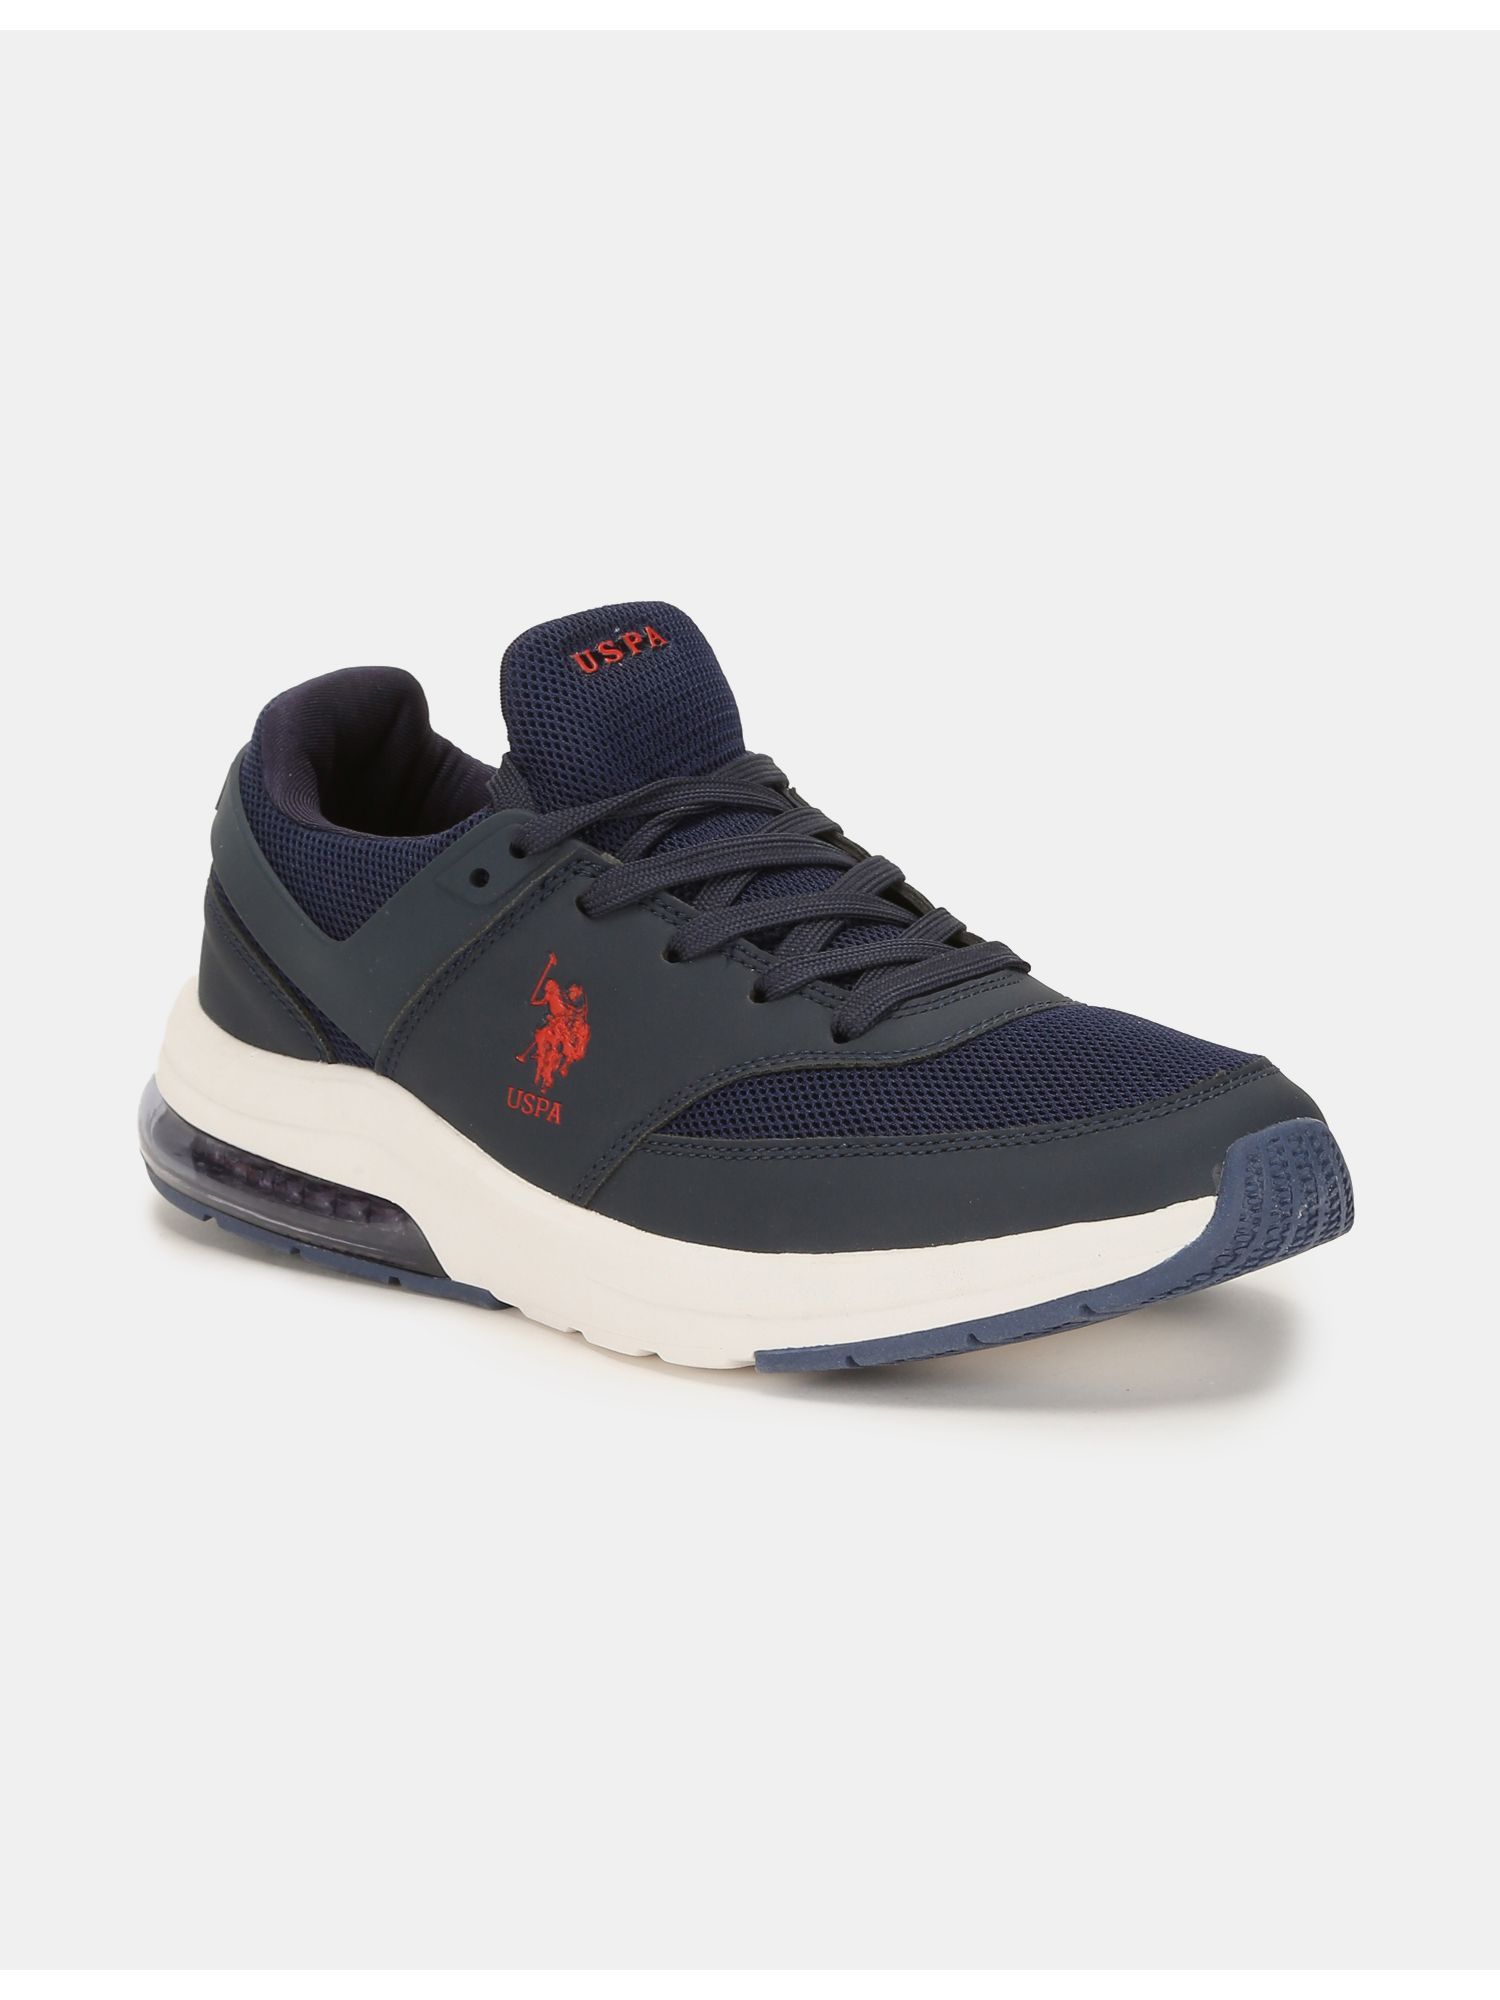 U.s. Polo Assn. Solid Sneakers - 10